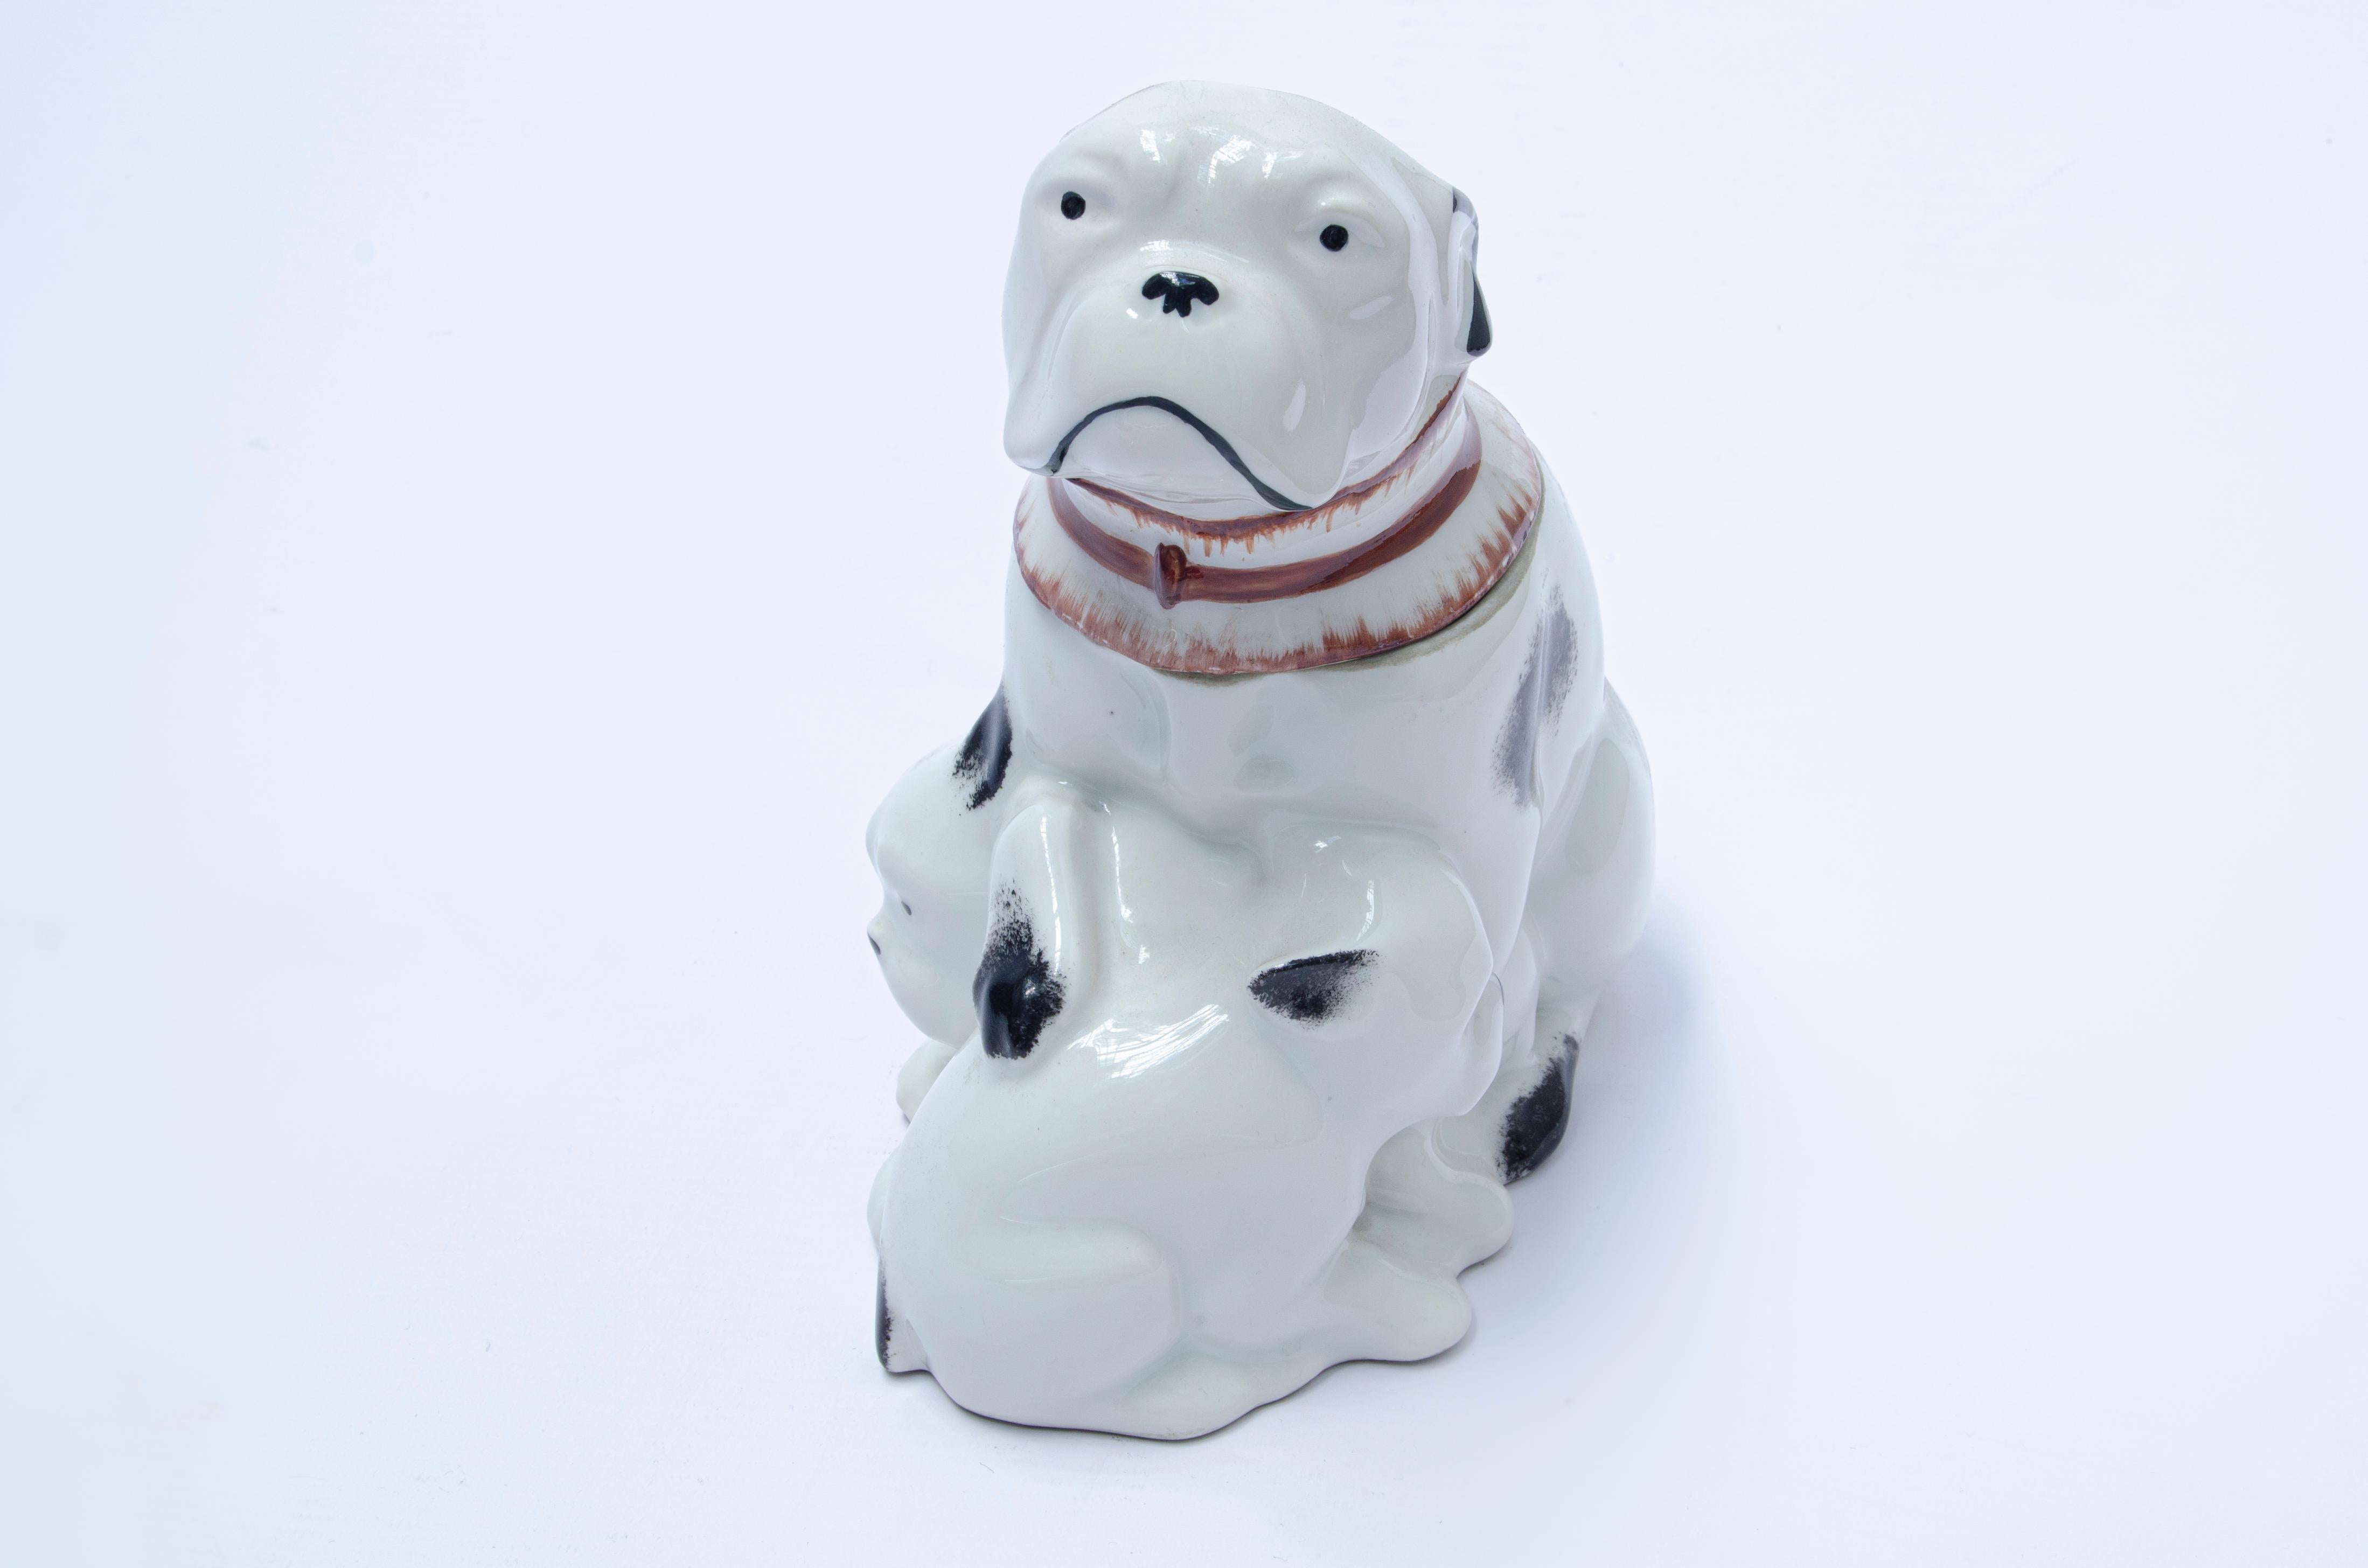 Dogs candy box by Edouard Marcel Sandoz (1881-1971) and manufactured by Haviland.

Wapler, Jacques-Ph. (1999) 